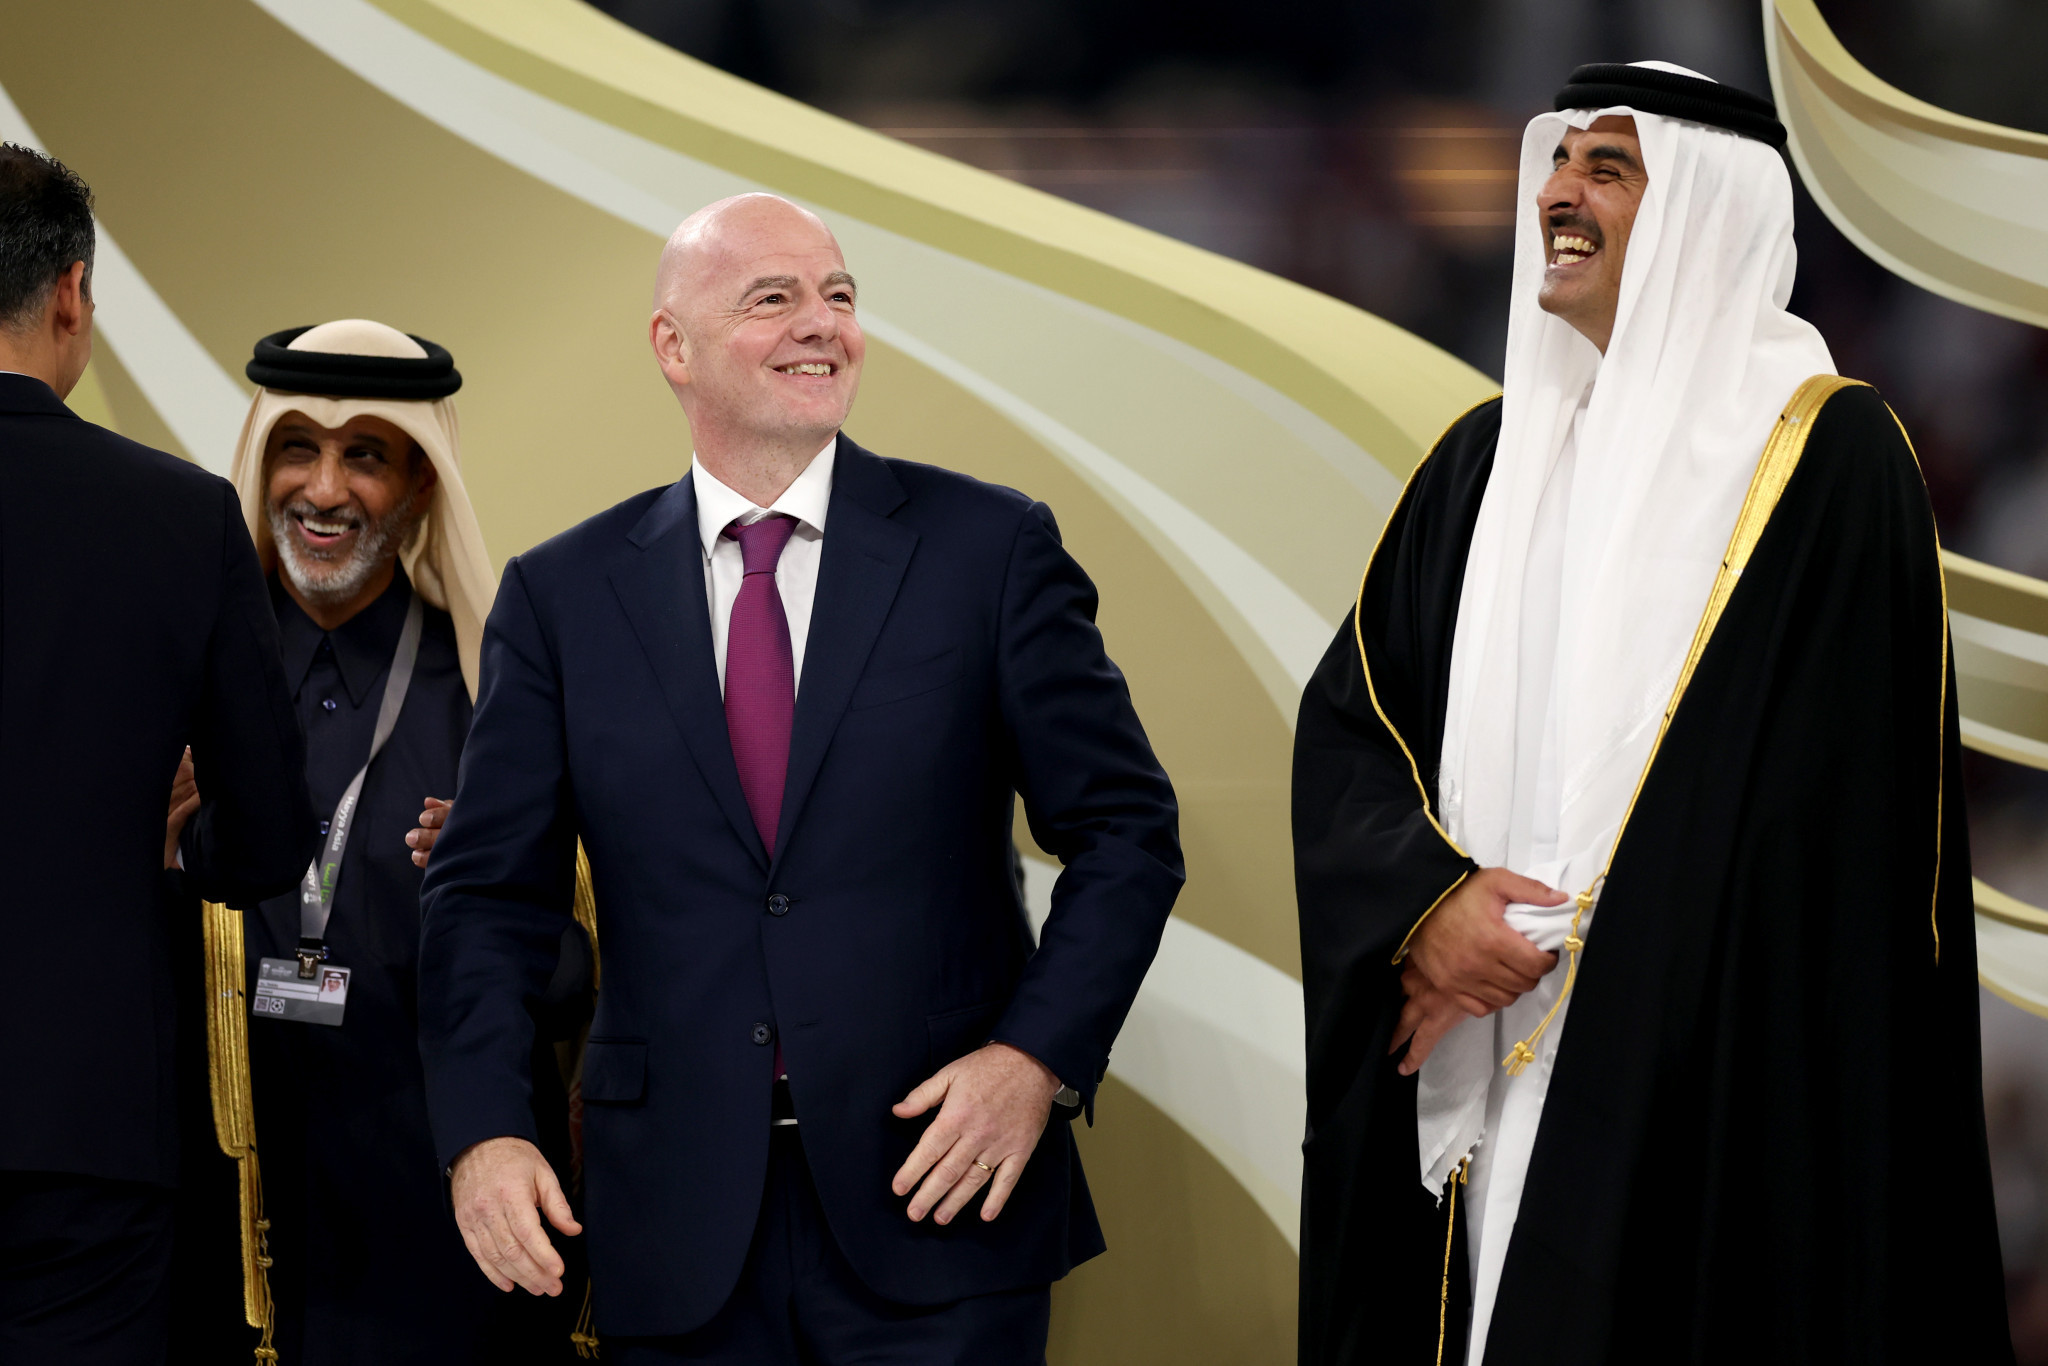 Qatar previously came under scrutiny for their hosting of the 2022 World Cup, and now Saudi Arabia is in the spotlight. GETTY IMAGES